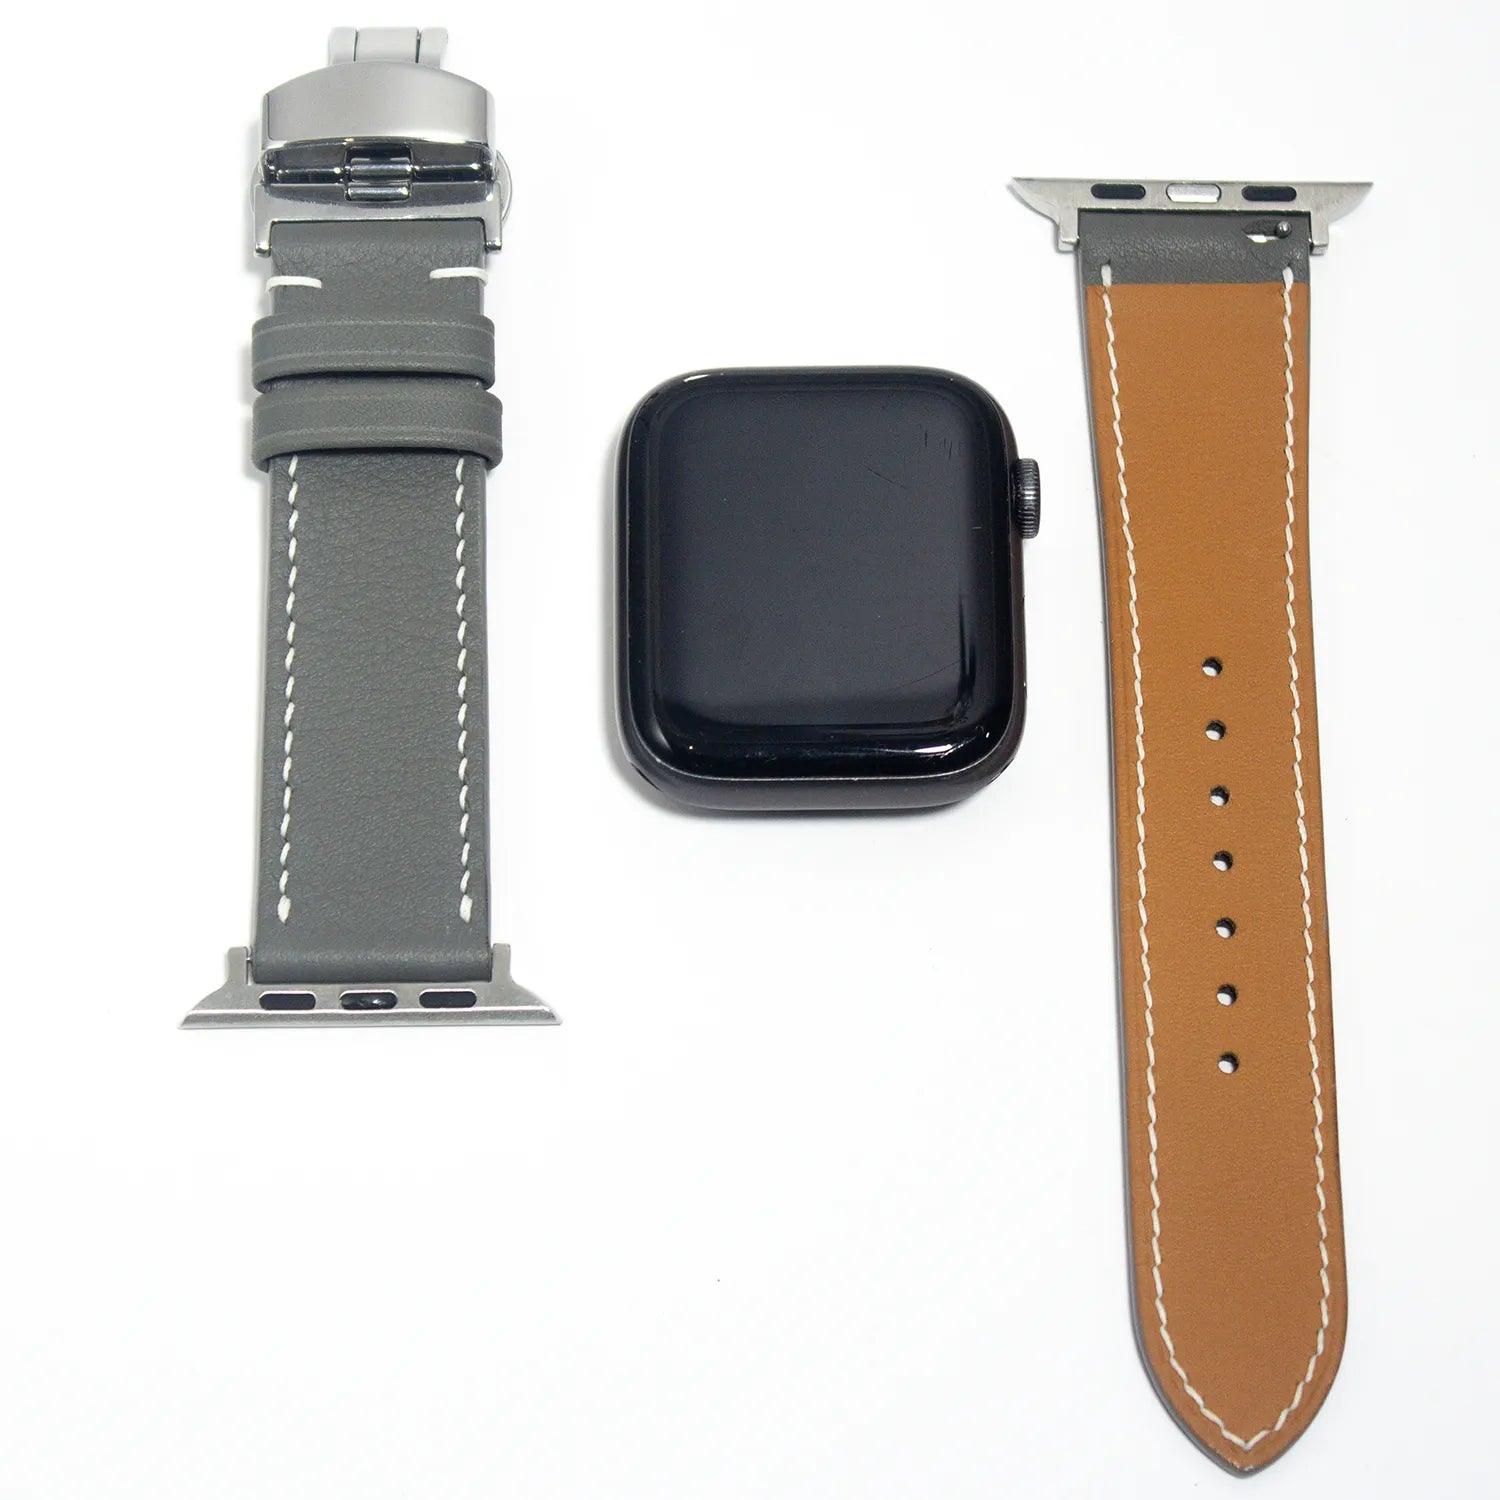 High-quality leather watch straps in grey Swift leather, designed for both elegance and durability.